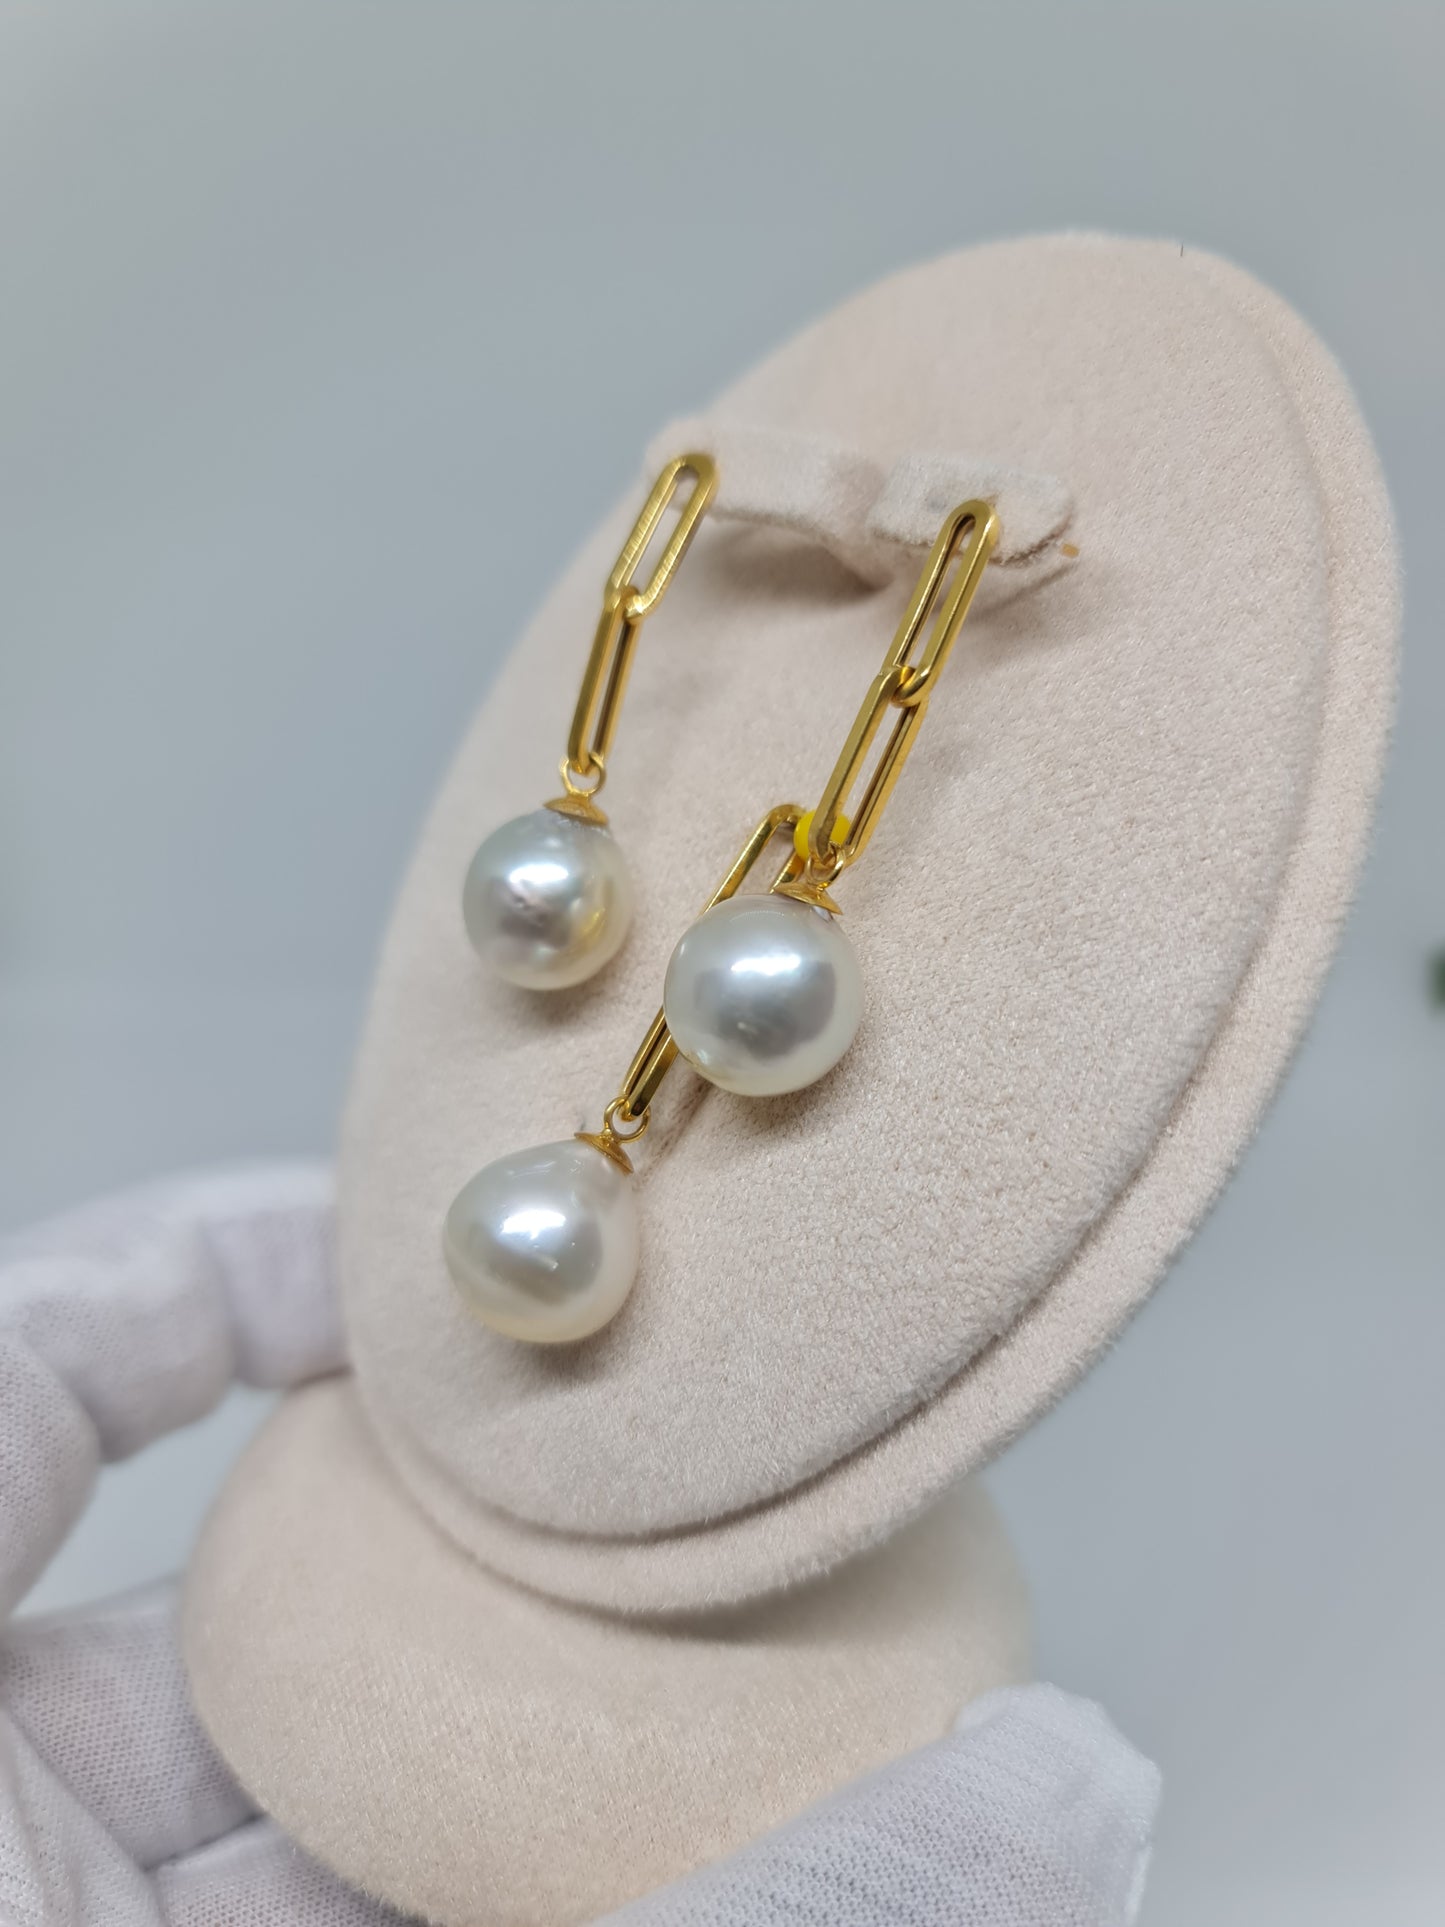 12.5mm to 13mm Classic White South Sea Pearls Set in 14K Gold